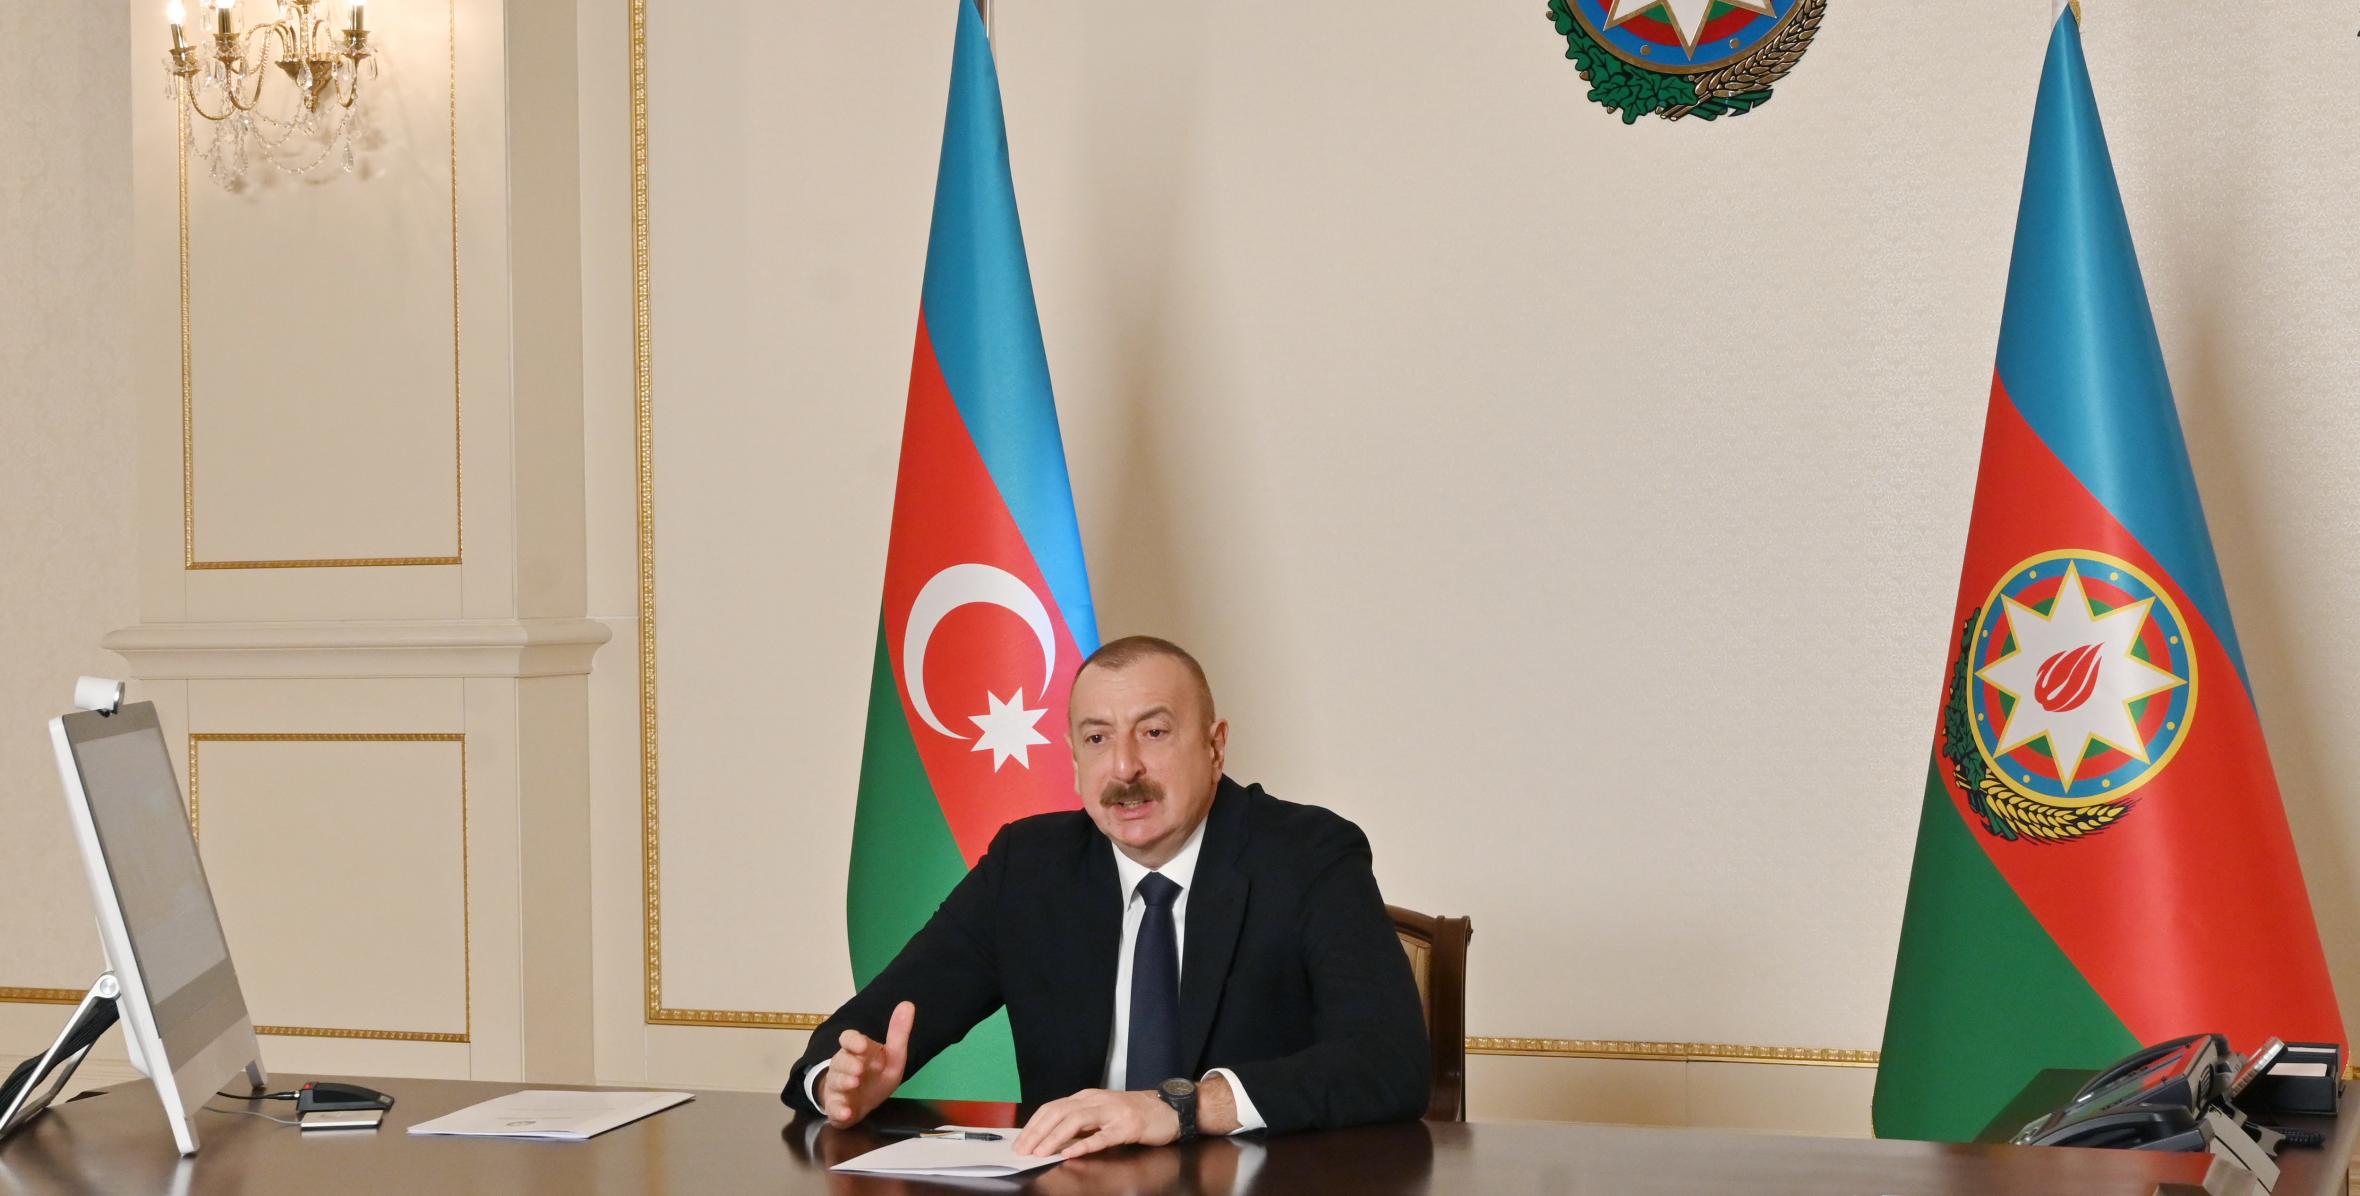 Ilham Aliyev received in a video format president of US-based Foundation for Ethnic Understanding Marc Schneier